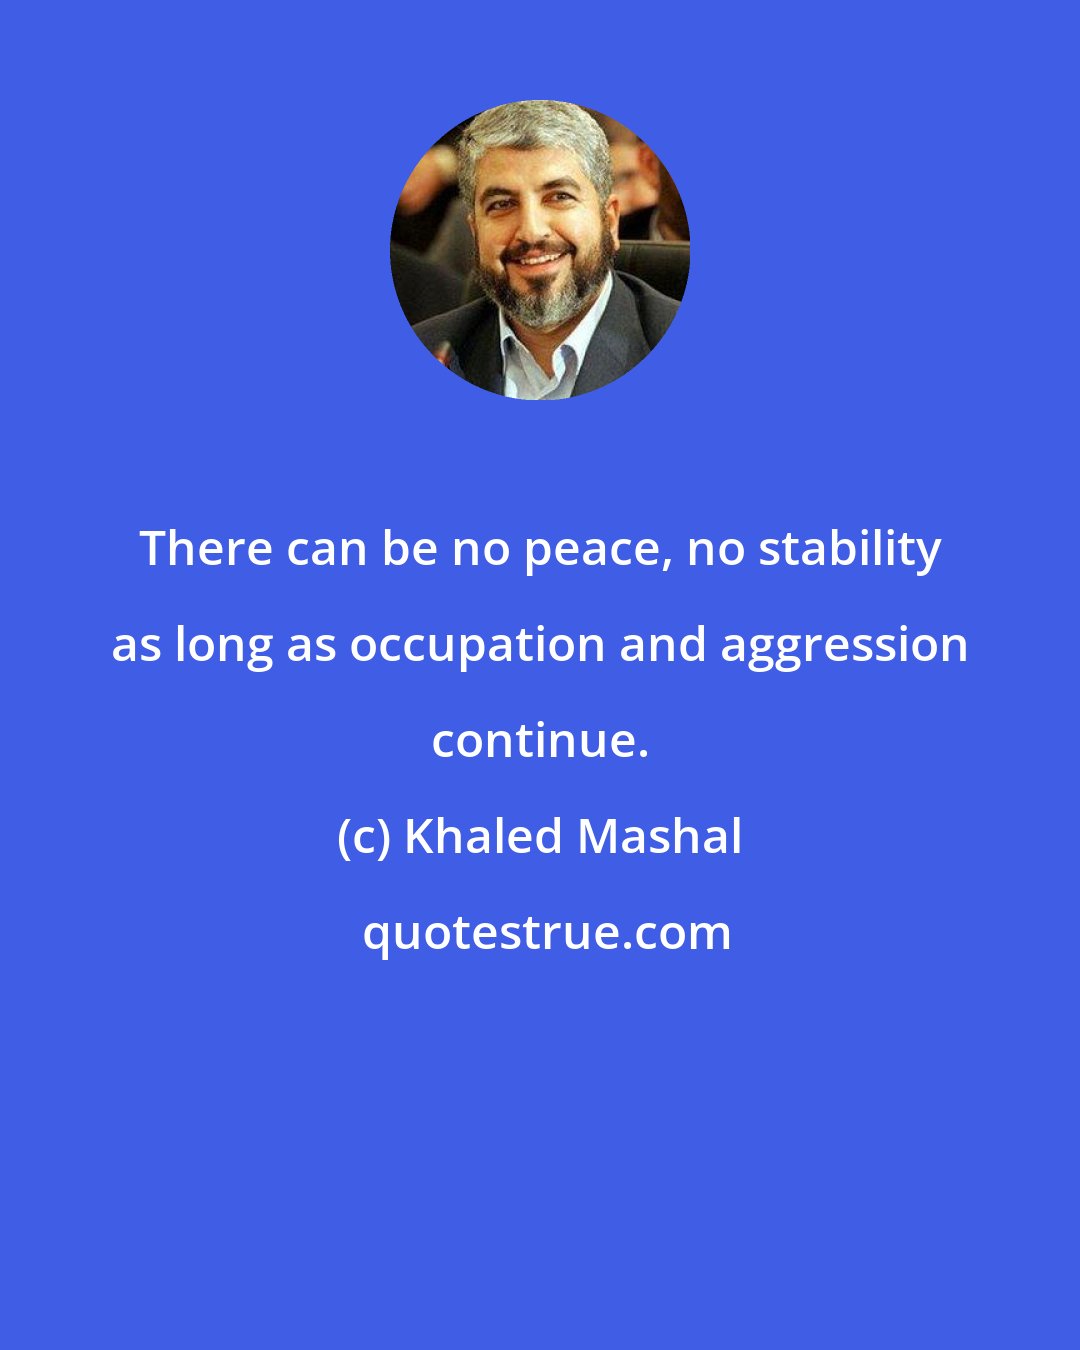 Khaled Mashal: There can be no peace, no stability as long as occupation and aggression continue.